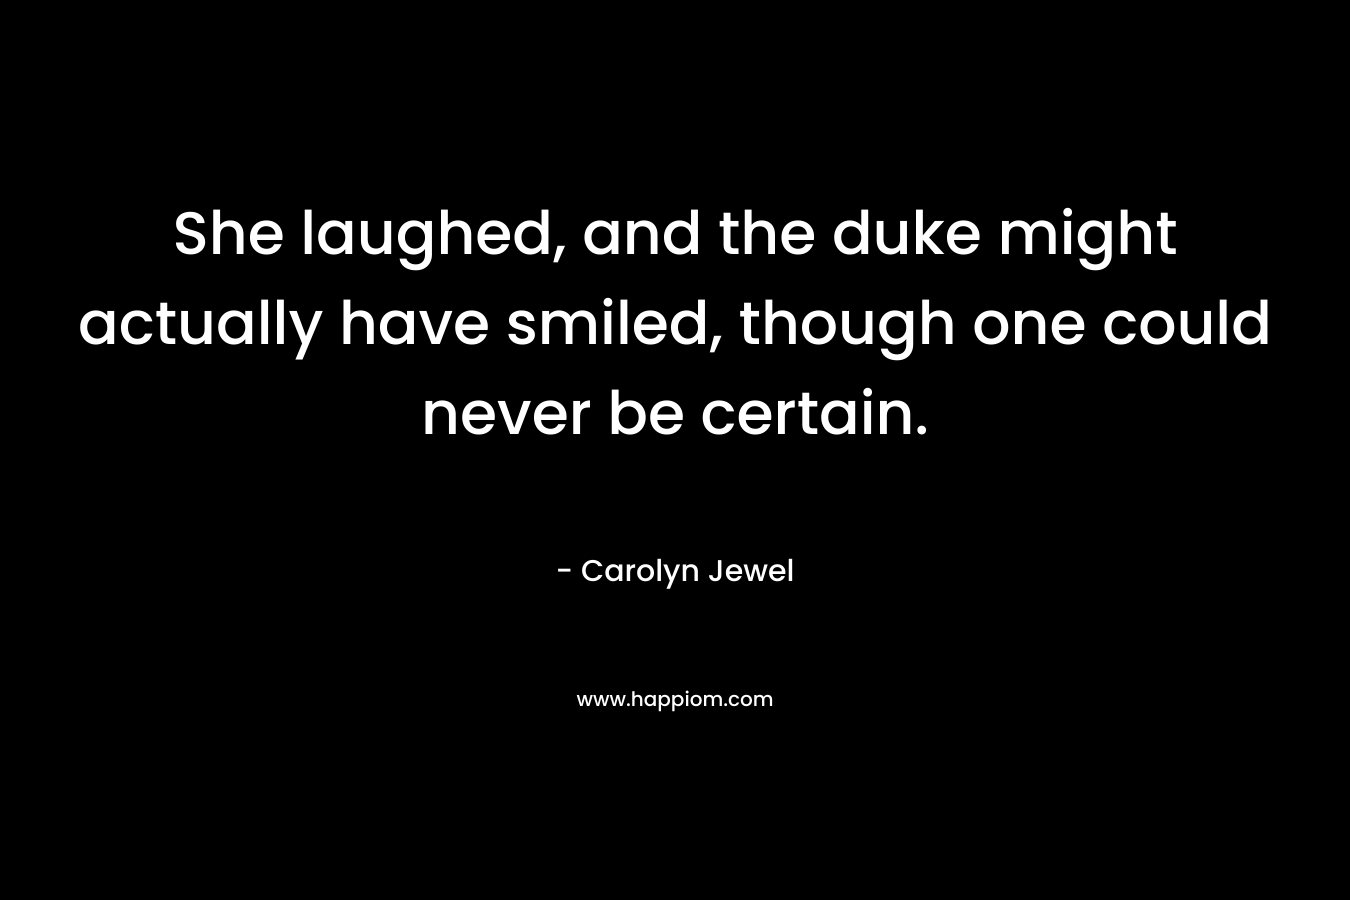 She laughed, and the duke might actually have smiled, though one could never be certain. – Carolyn Jewel